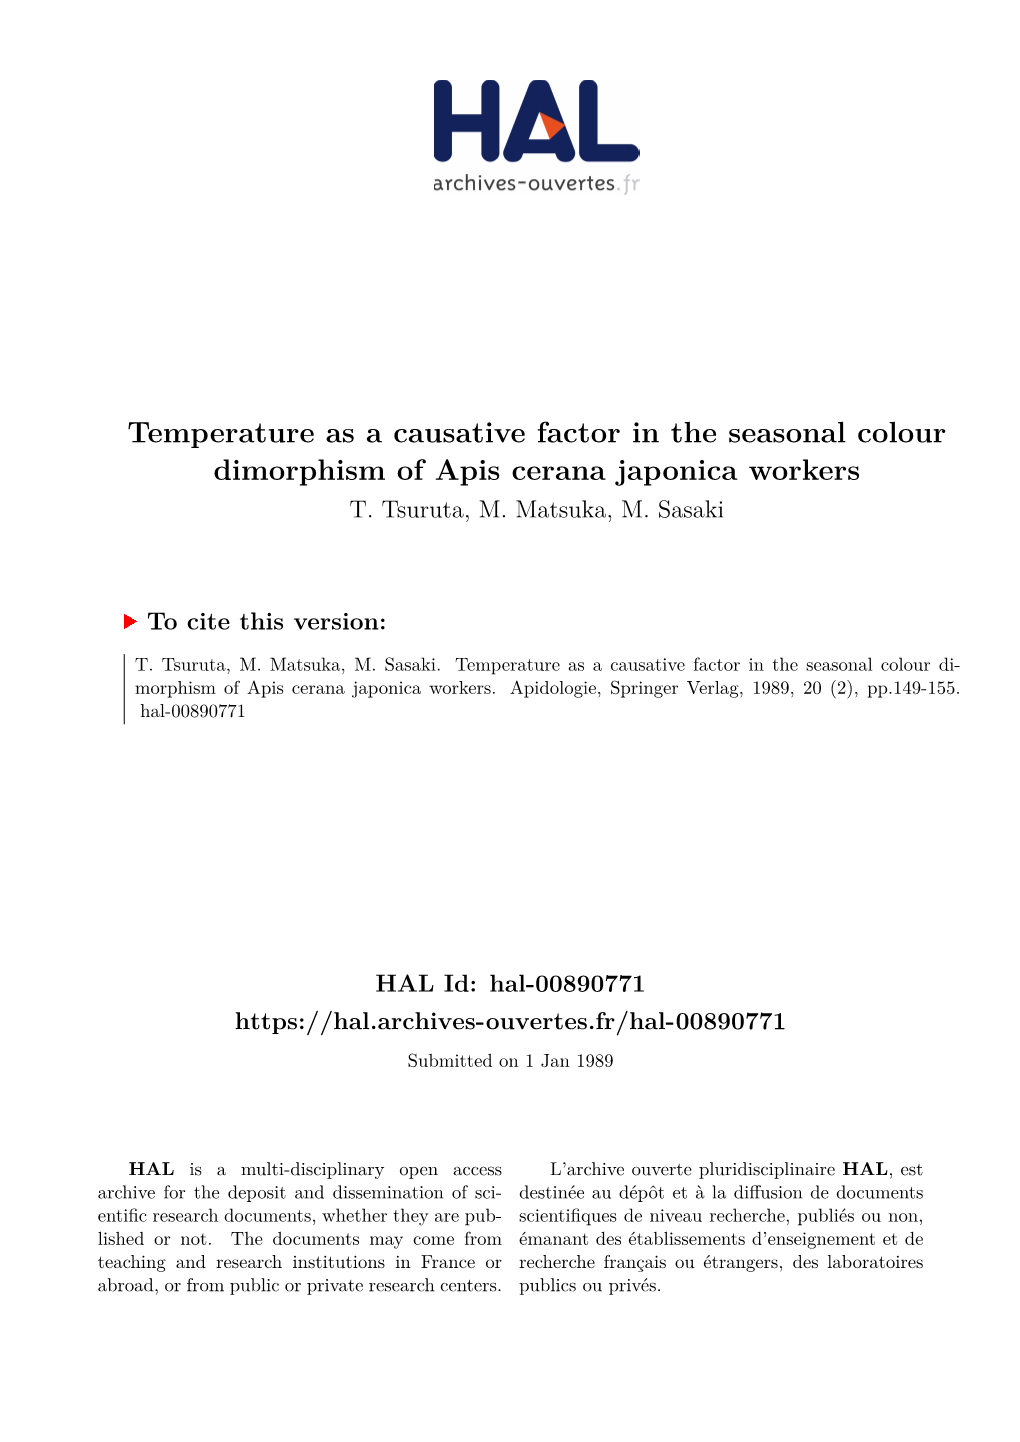 Temperature As a Causative Factor in the Seasonal Colour Dimorphism of Apis Cerana Japonica Workers T